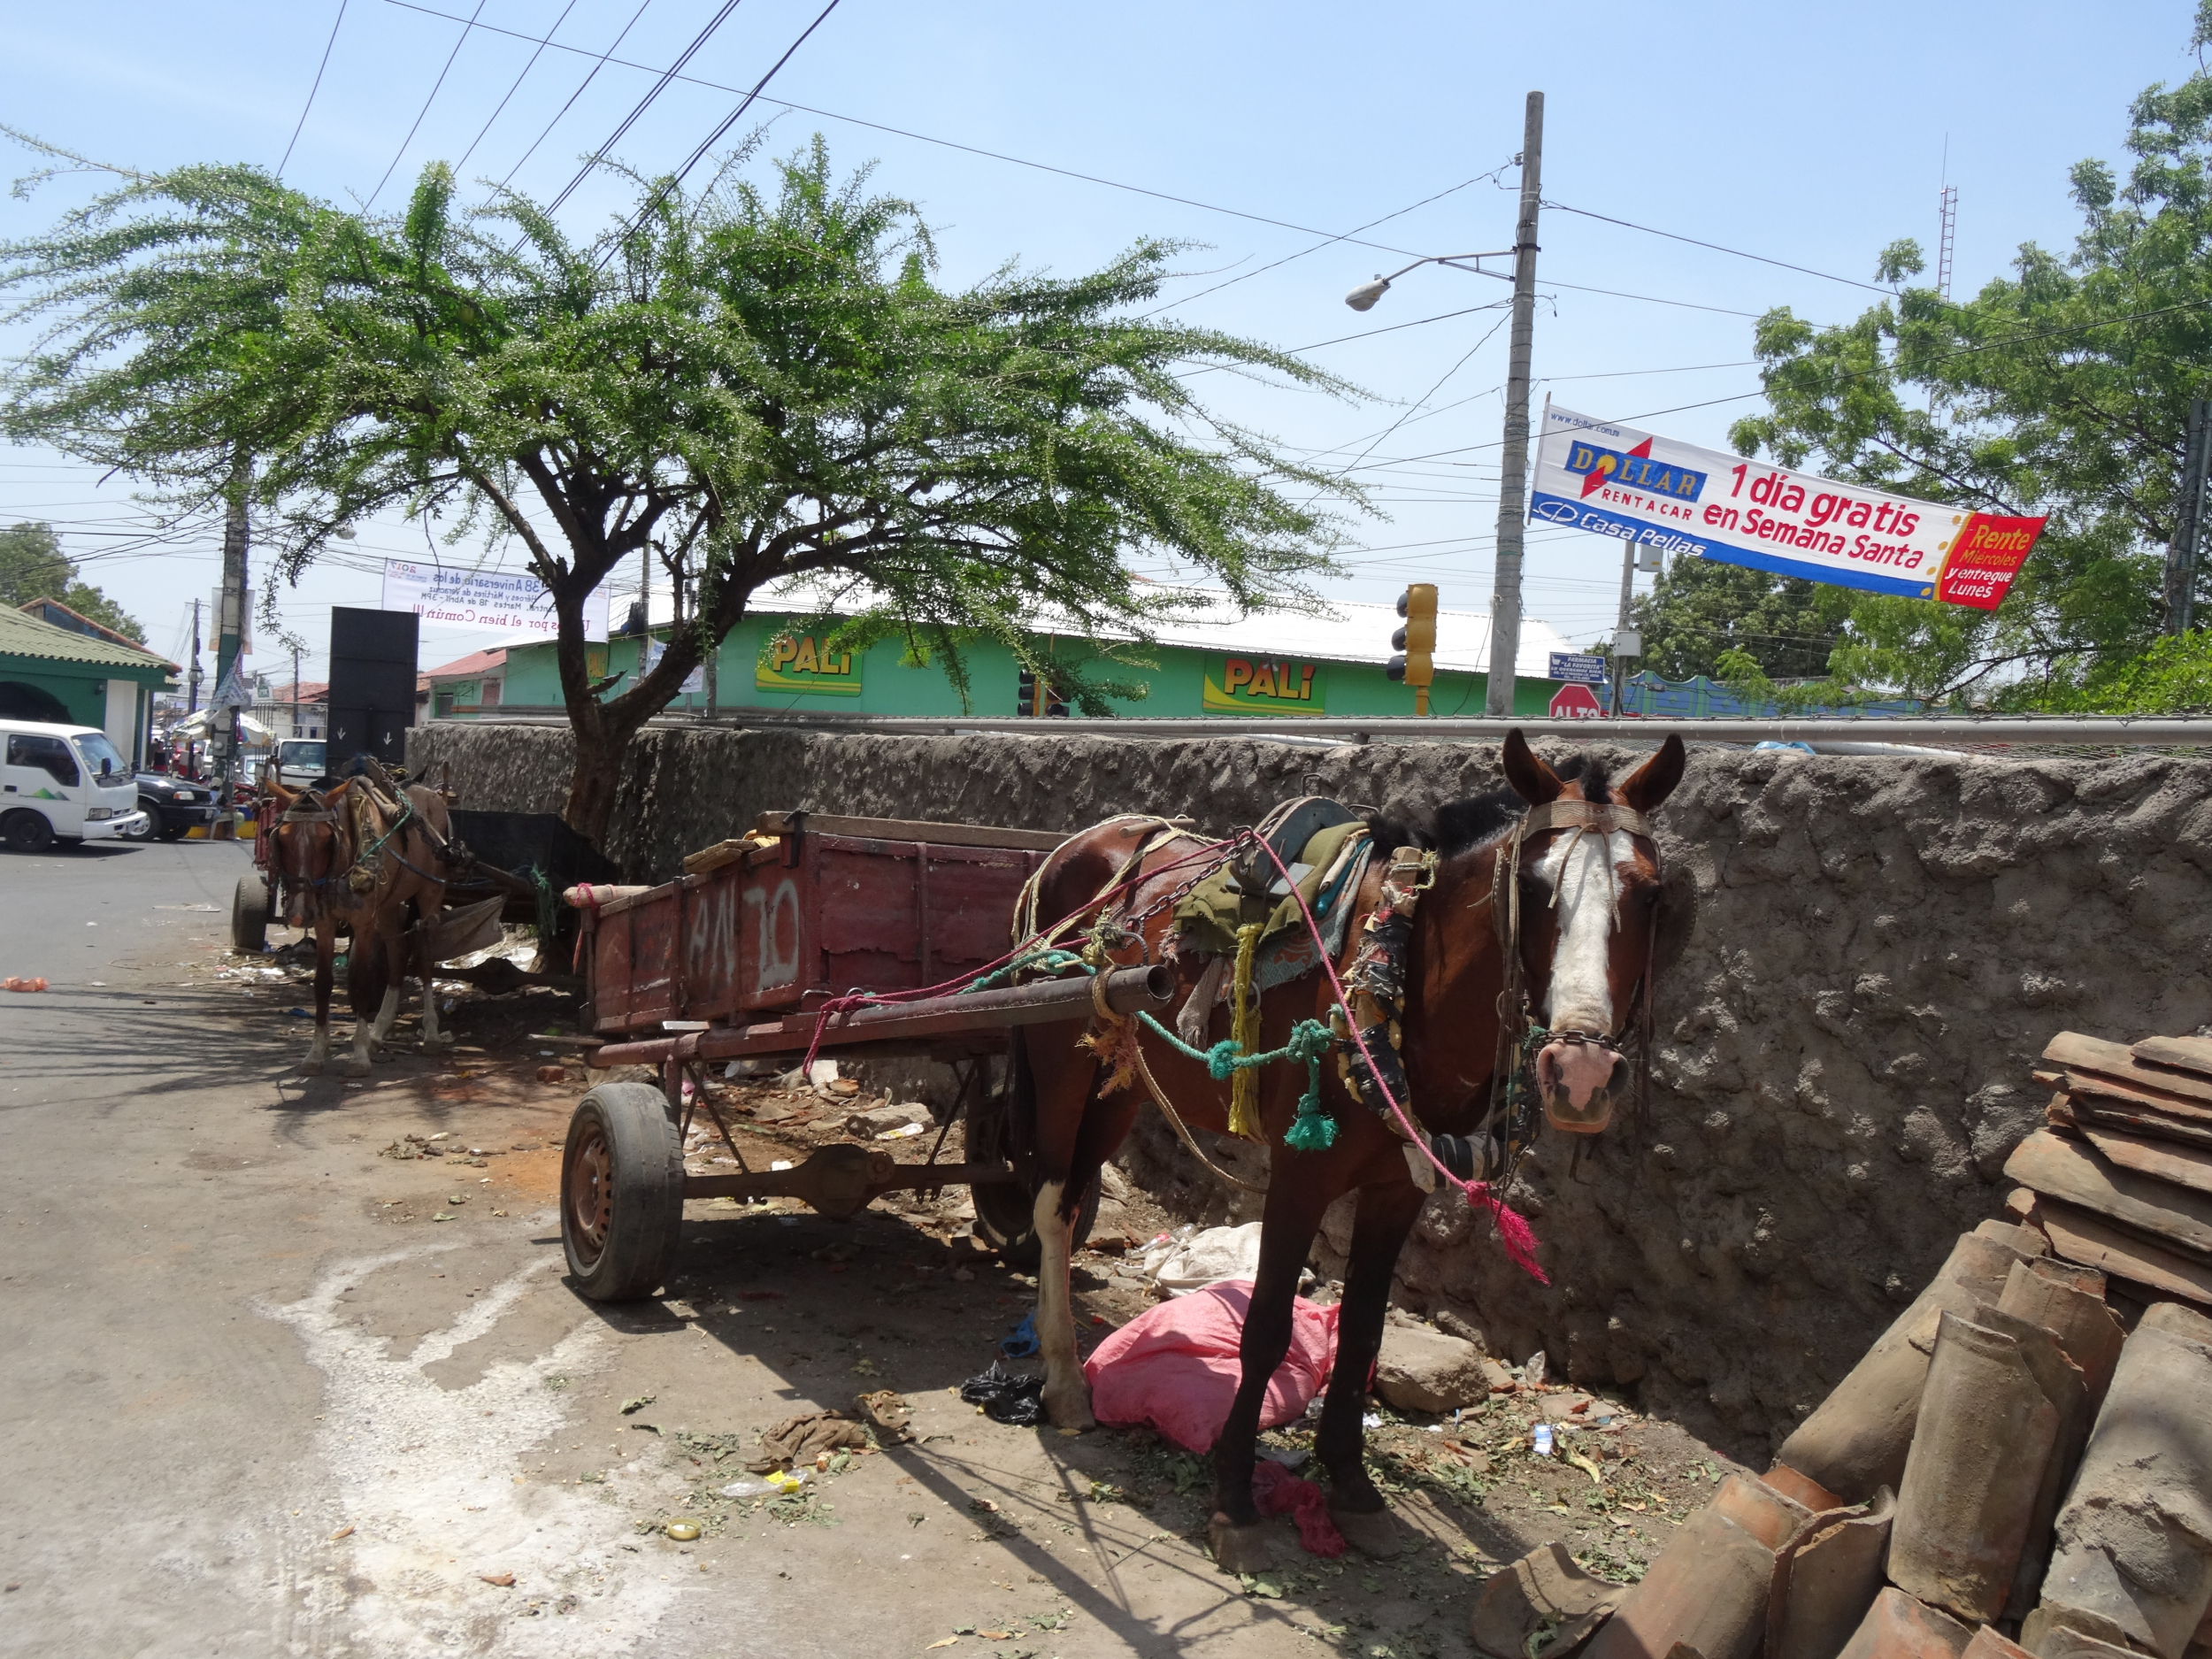 5. Sharing the roads with animals, bikes, cars and pushcarts